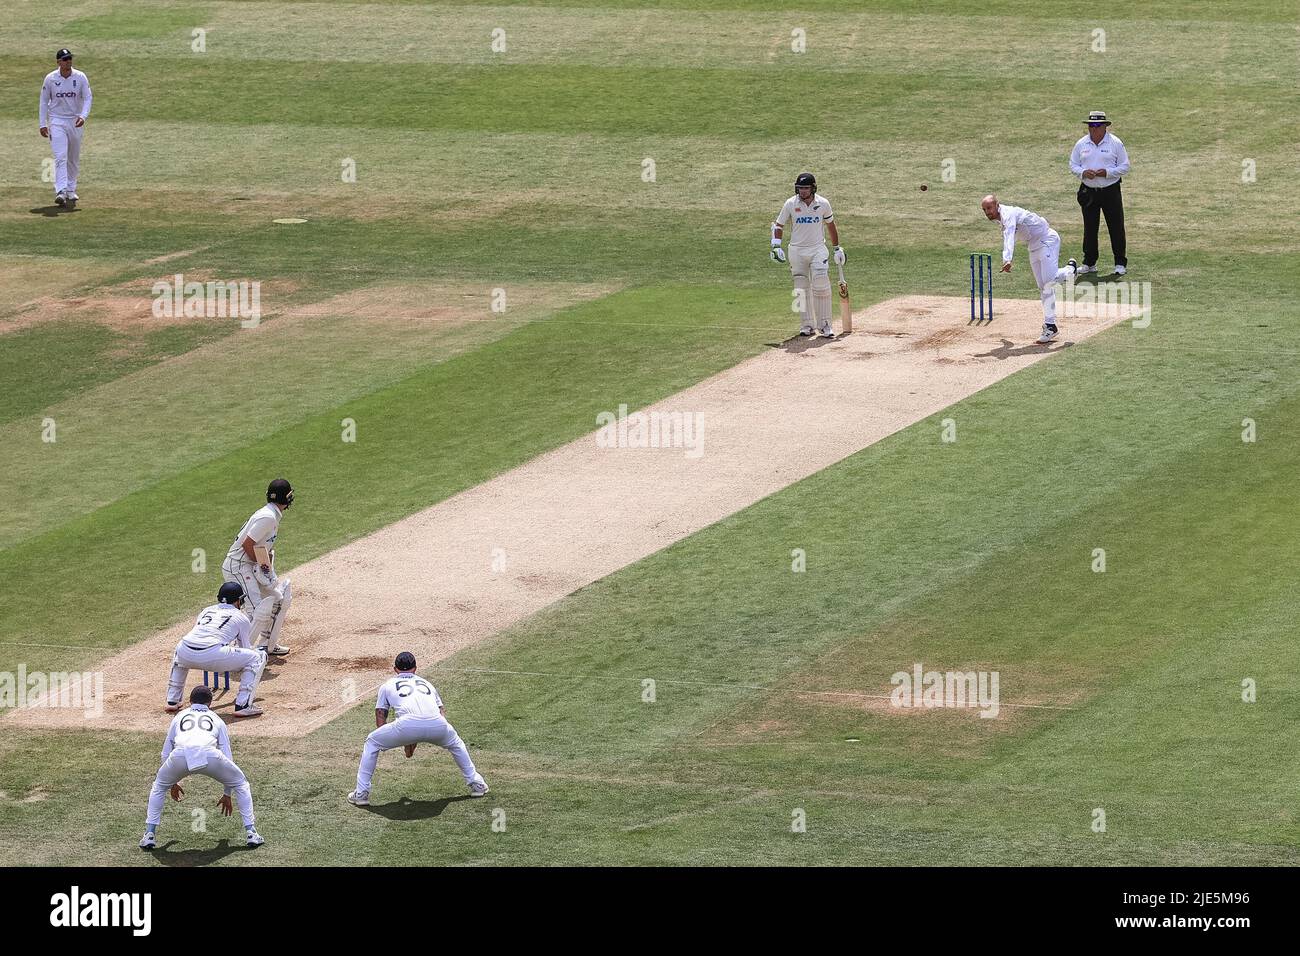 Leeds, UK. 25th June, 2022. Jack Leach of England delivers the ball to Tom Latham of New Zealand in Leeds, United Kingdom on 6/25/2022. (Photo by Mark Cosgrove/News Images/Sipa USA) Credit: Sipa USA/Alamy Live News Stock Photo